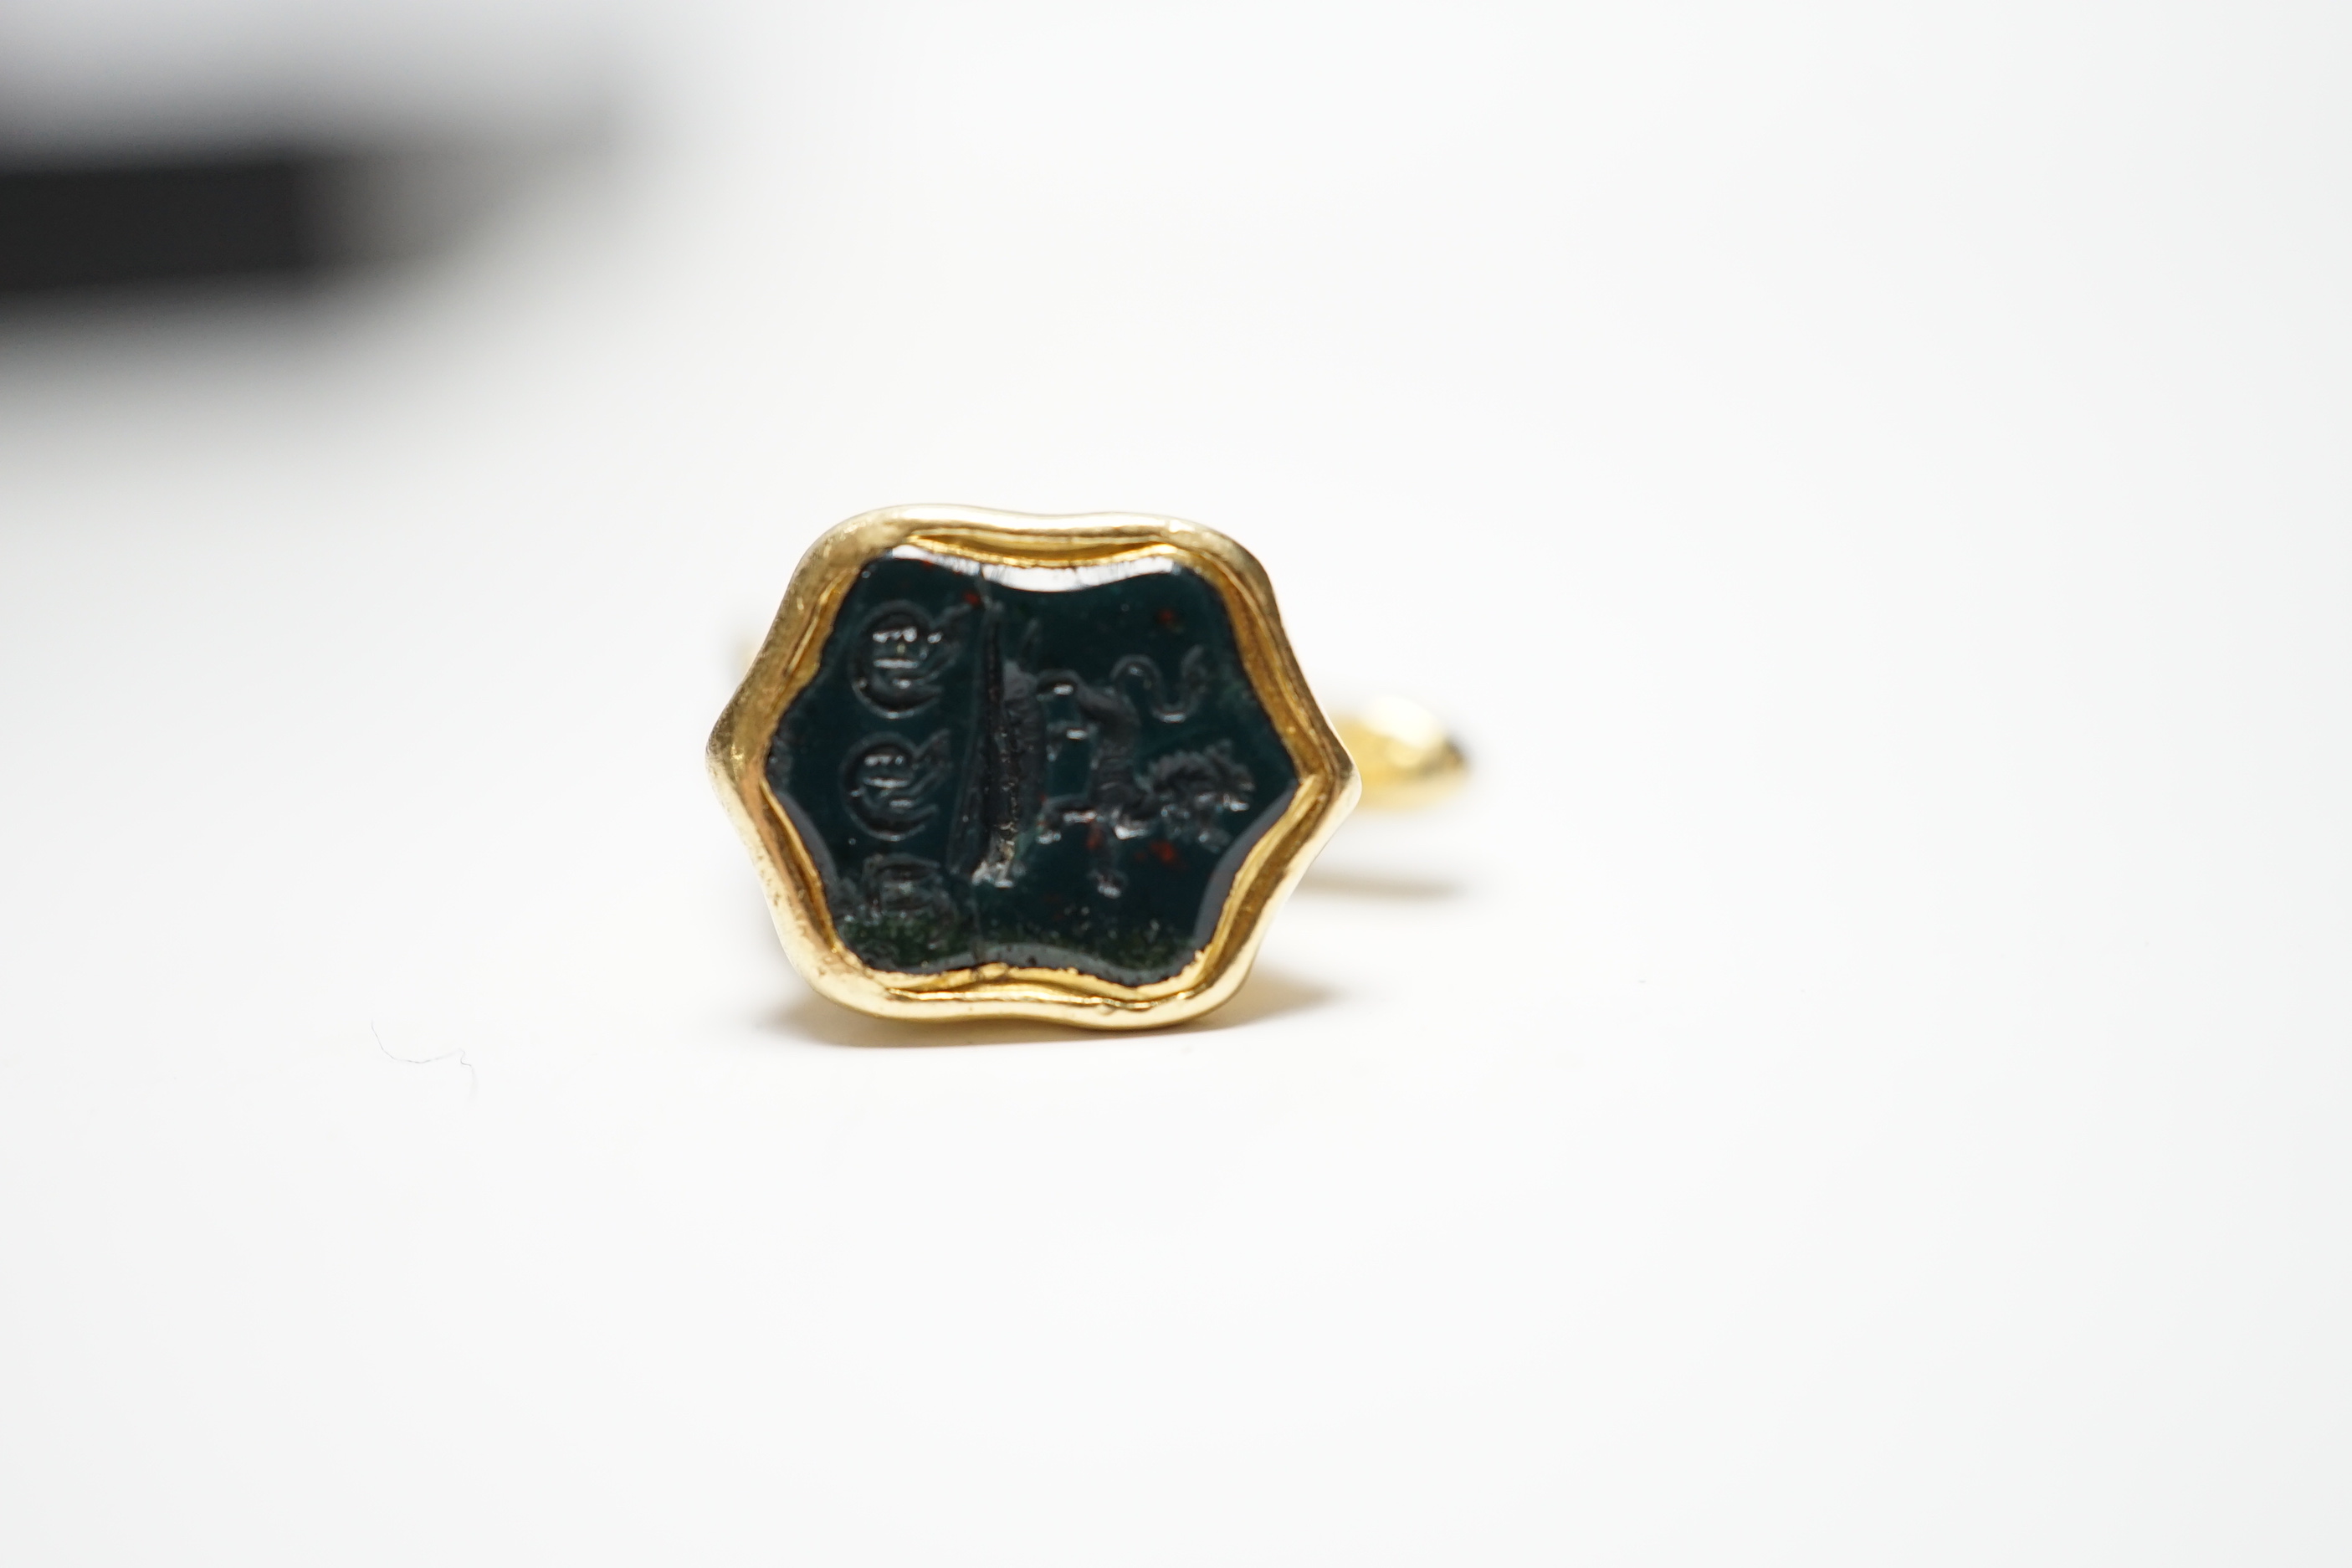 A 19th century yellow metal and bloodstone inset horse's head seal, the matrix carved with crest, 18mm.